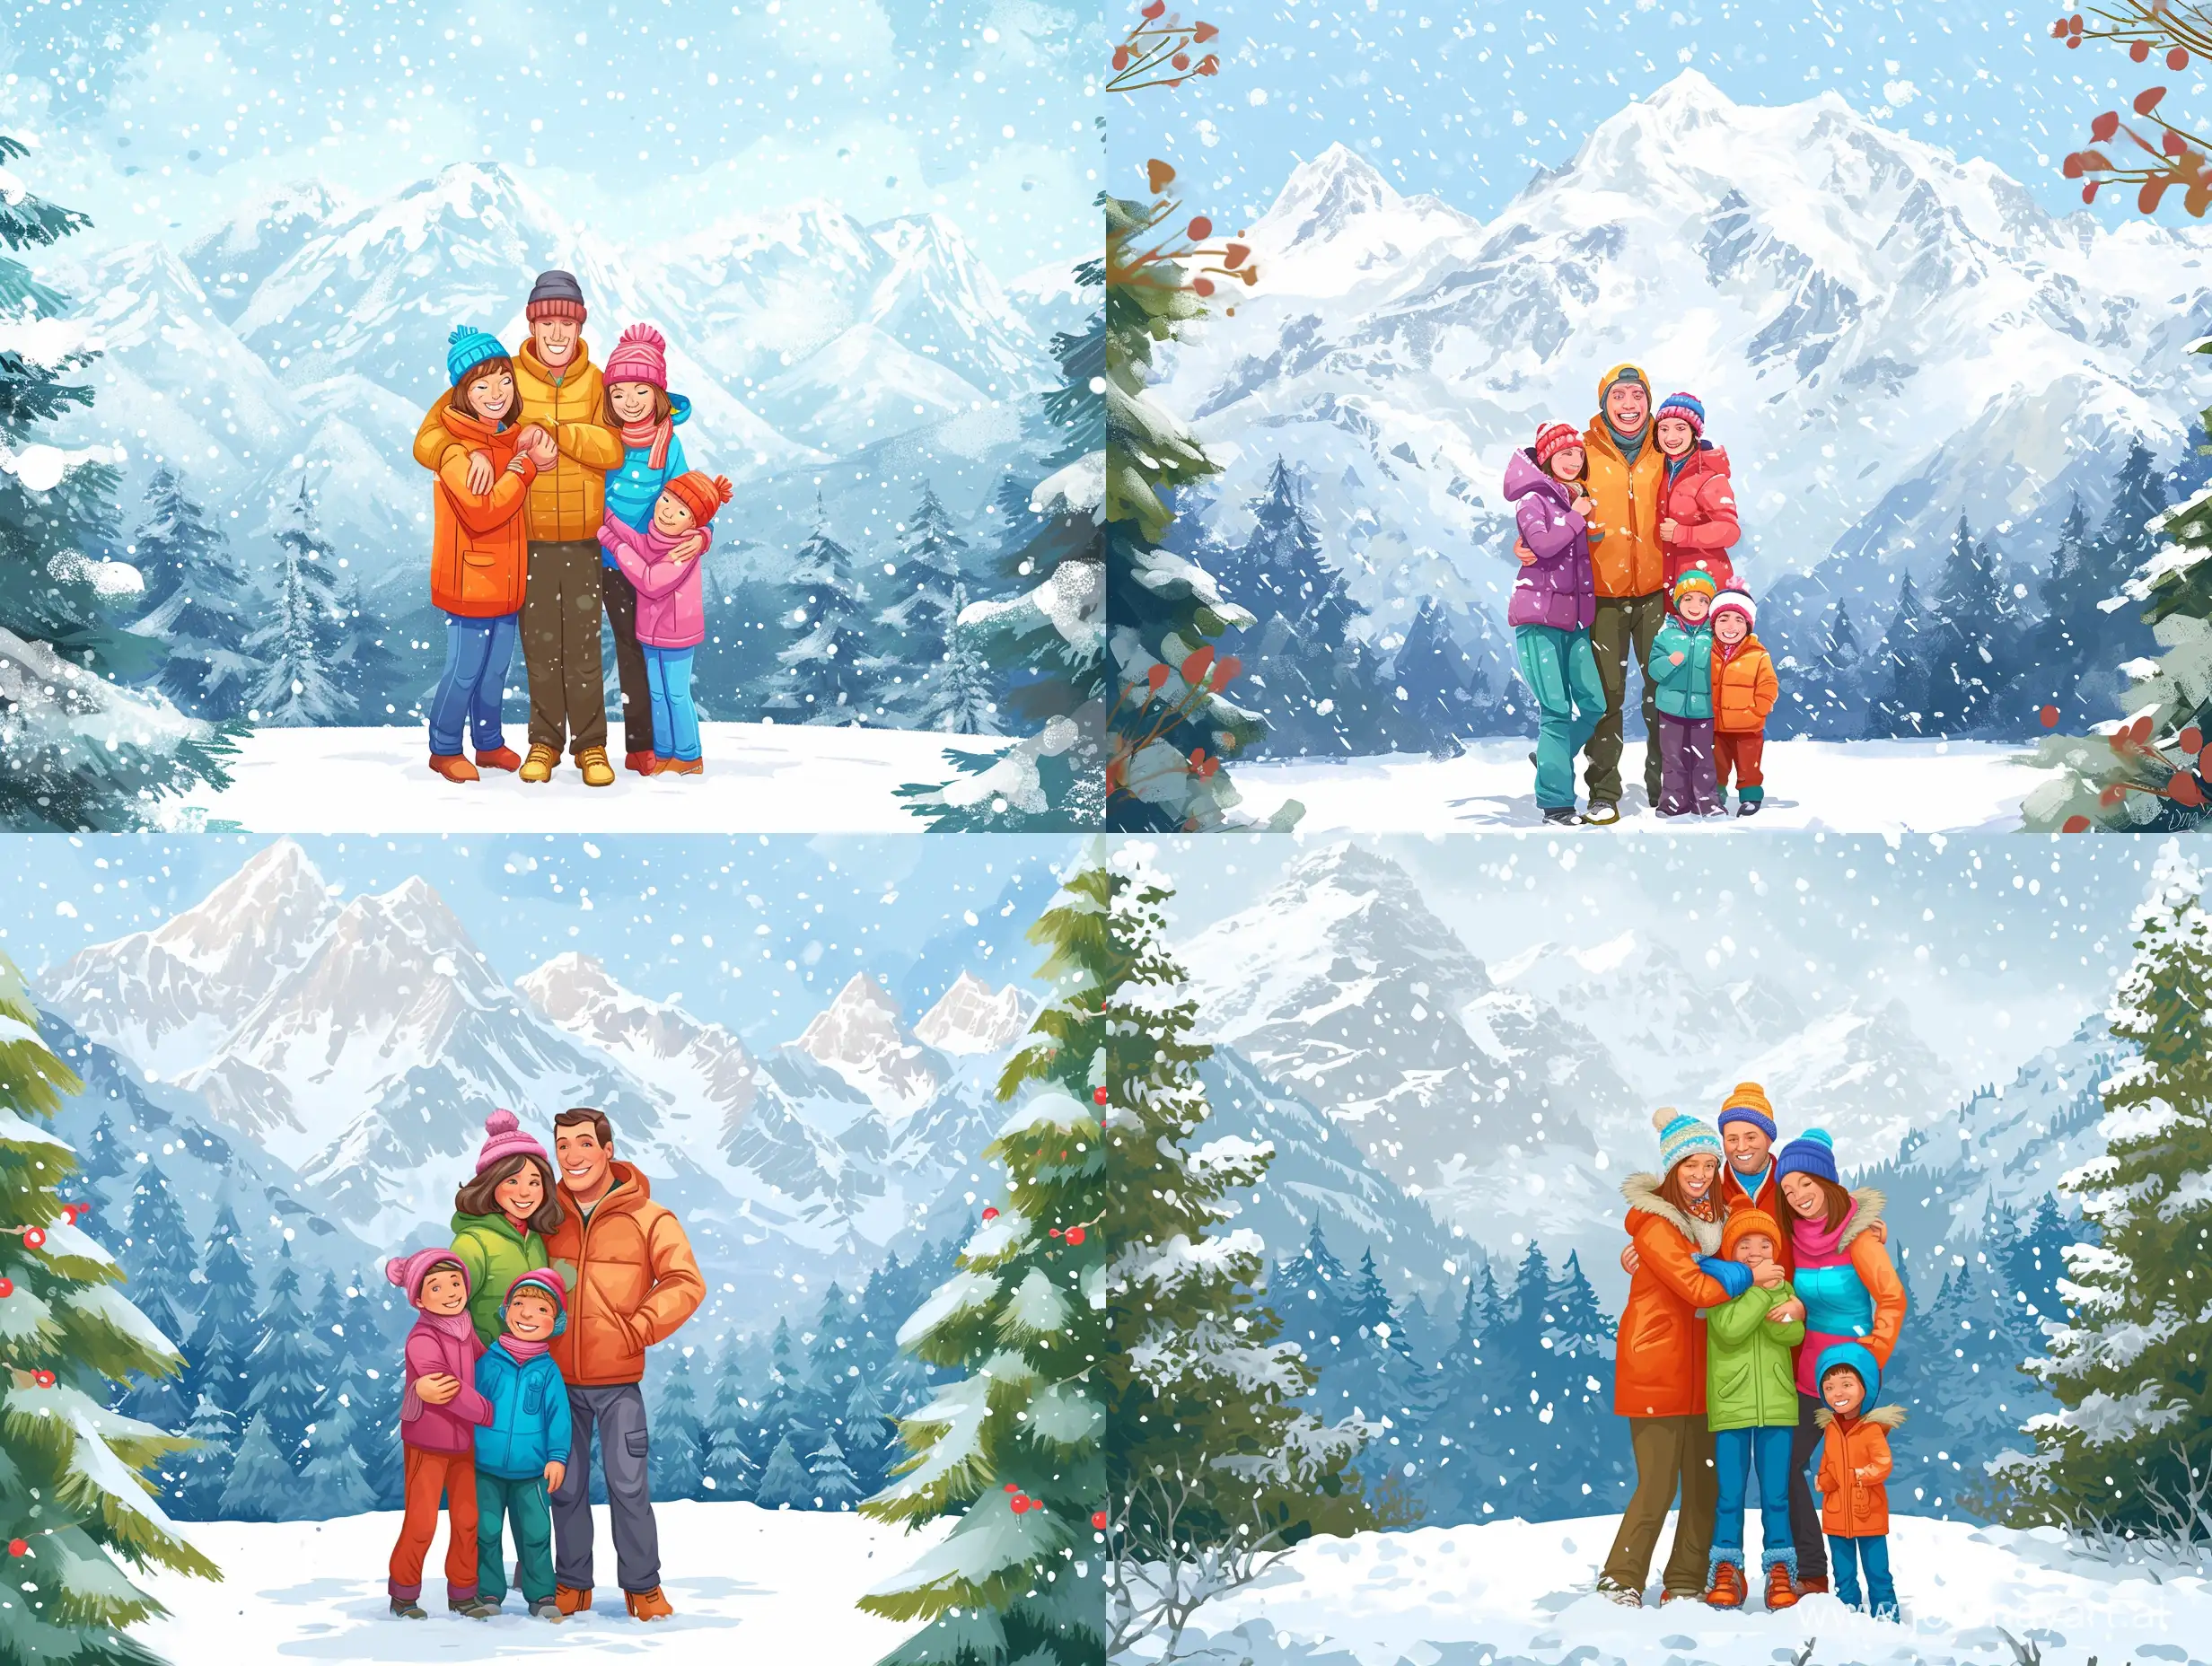 Disney Cartoon style of  A family of four, consisting of a man, a woman, and two children, stand together, embraced, against the backdrop of a snow-covered mountain. It's snowing softly. They are all smiling into the camera, capturing the joyous moment. Parents and children are dressed in bright colored jackets, hats and scarves. The snow-covered forest and other peaks can be seen in the distance.